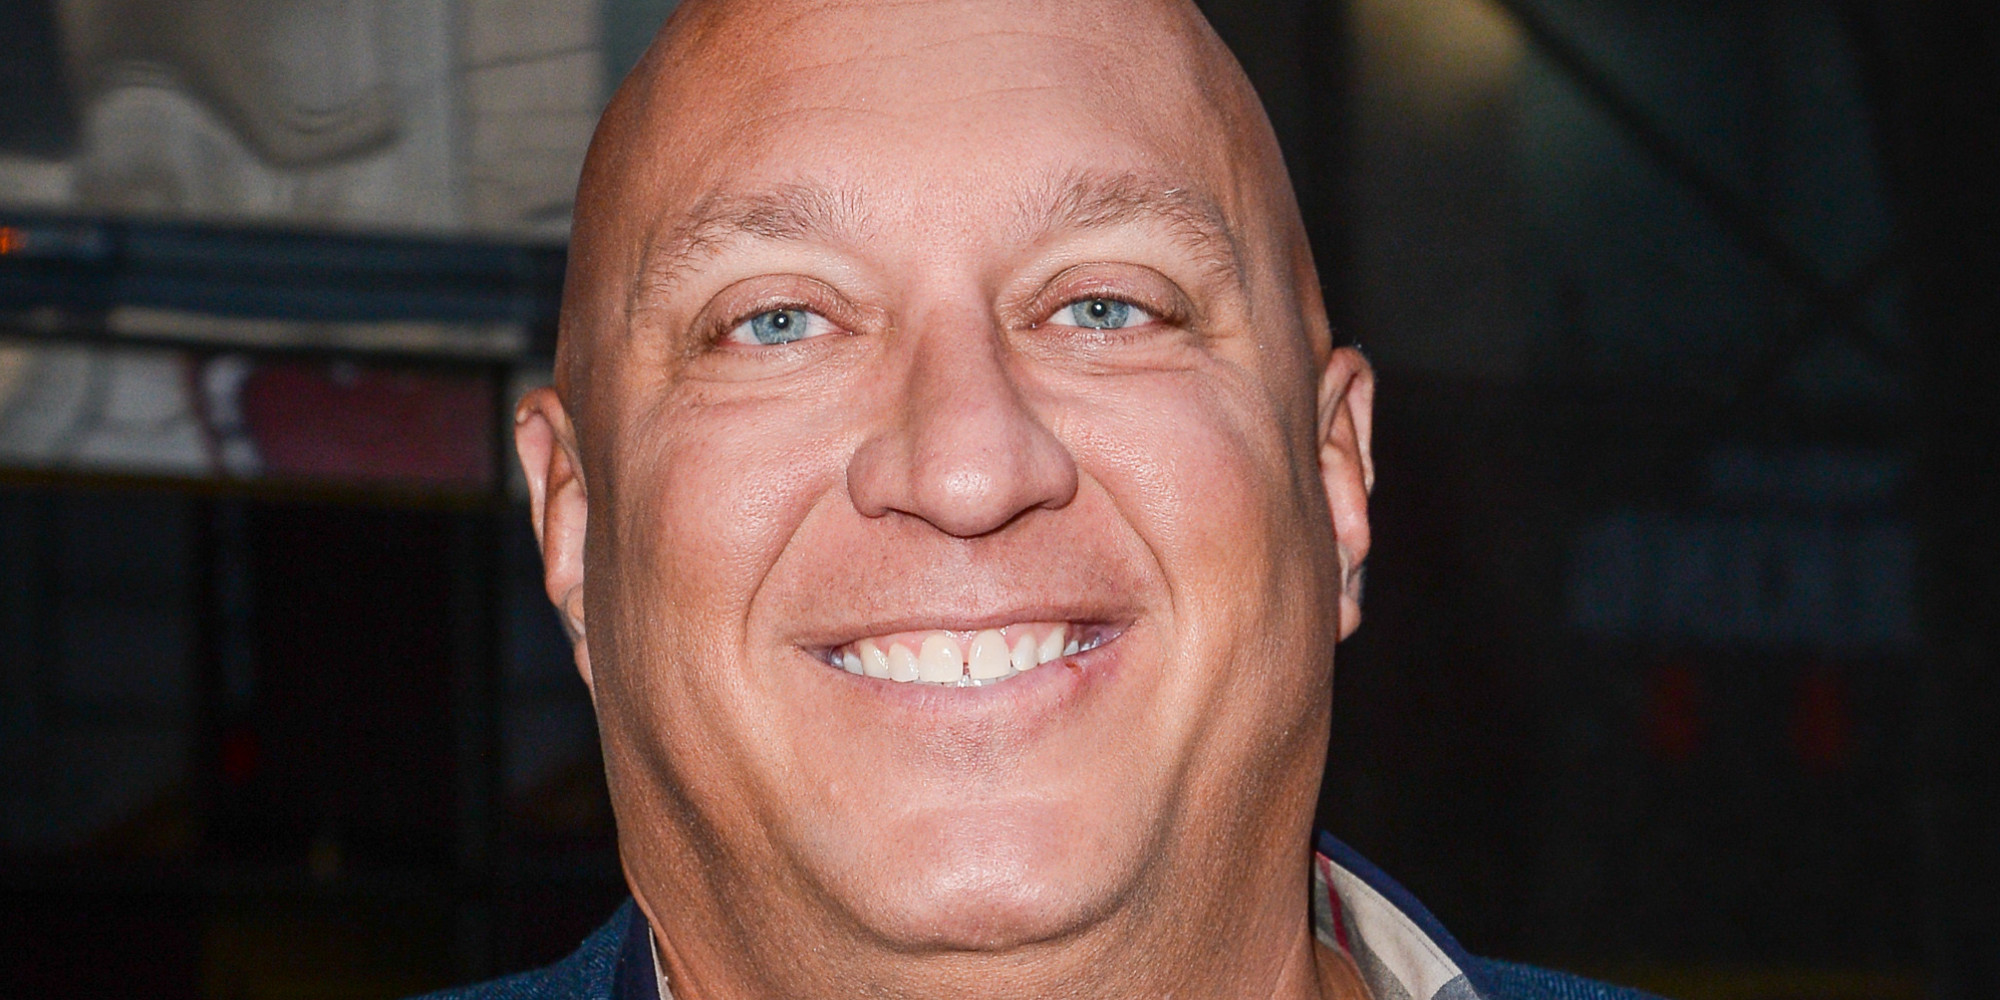 Talk Show Host Steve Wilkos On The Worst Types Of Guests (VIDEO)